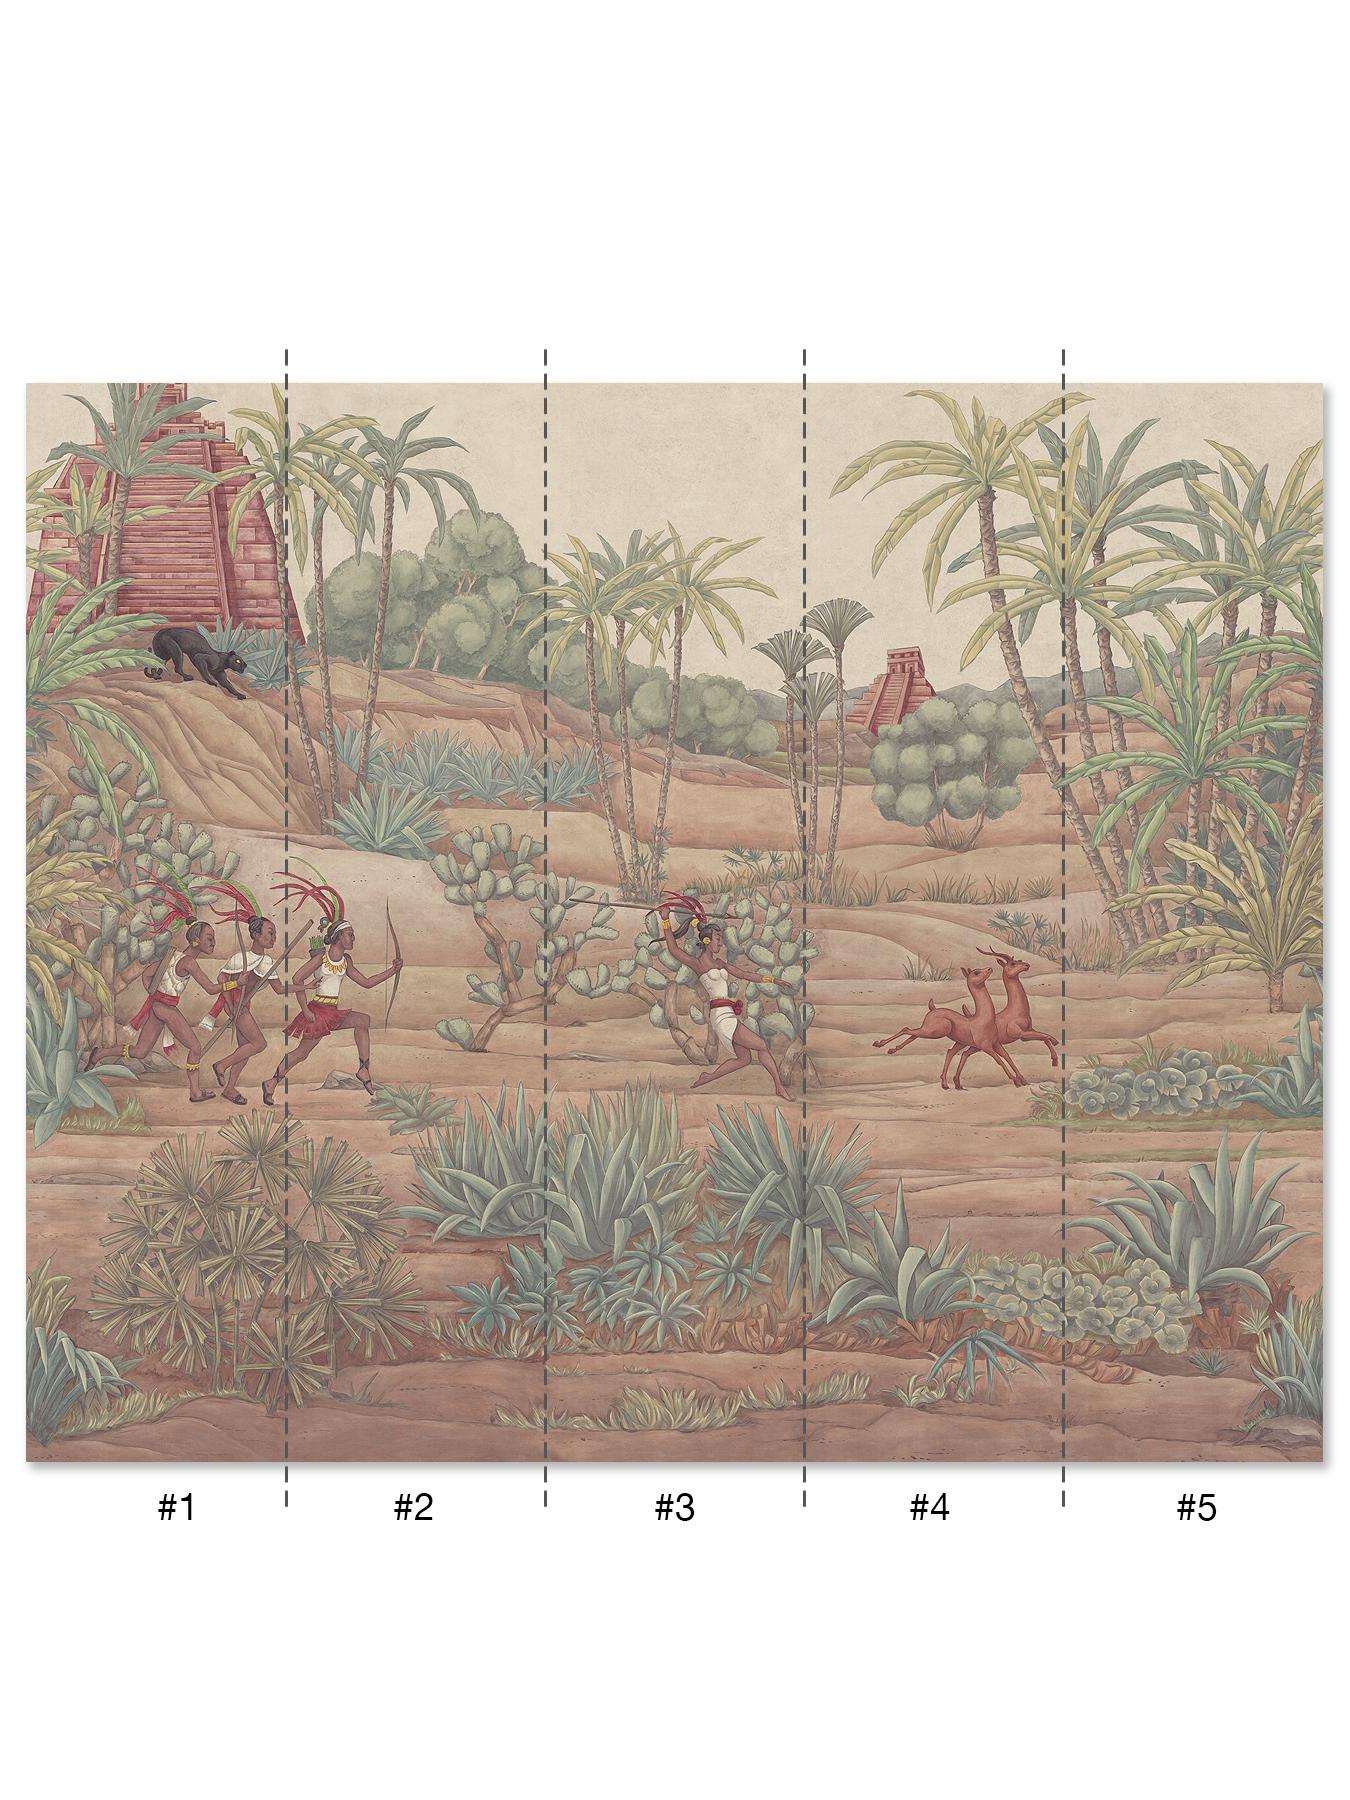 Mayana Oasis is an exotic mural depicting the ancient world of the Central Americas Mayan people. A group of hunters chase the game through the jungle and temples. This original mural was hand painted in the Art Deco style on panels of non-woven